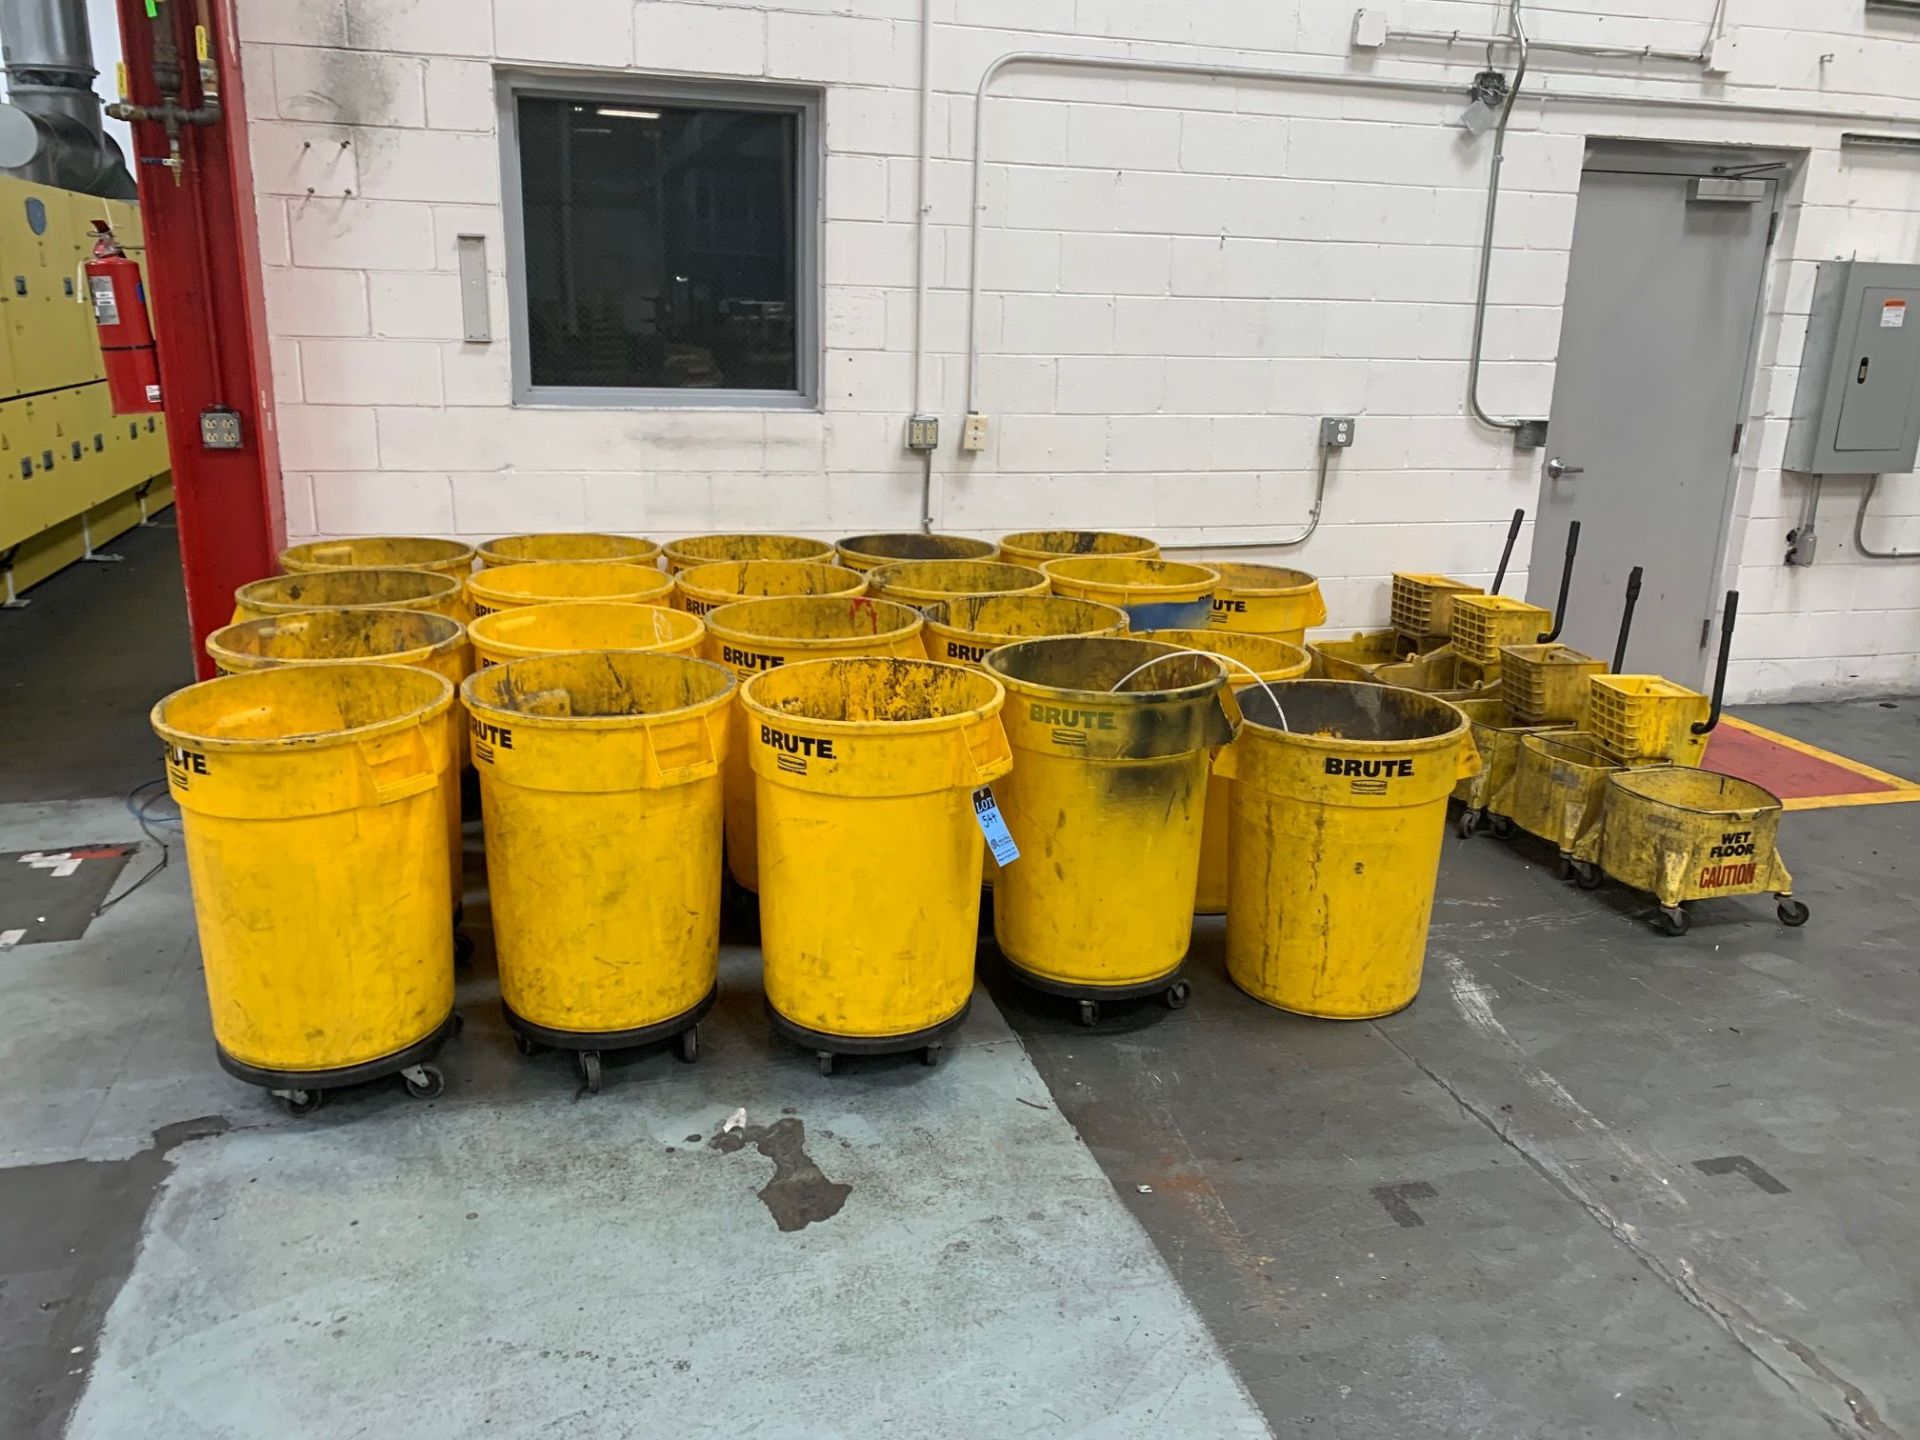 RUBBERMAID BRUTE YELLOW TRASH CONTAINERS W/ MOB BUCKET - Image 2 of 2